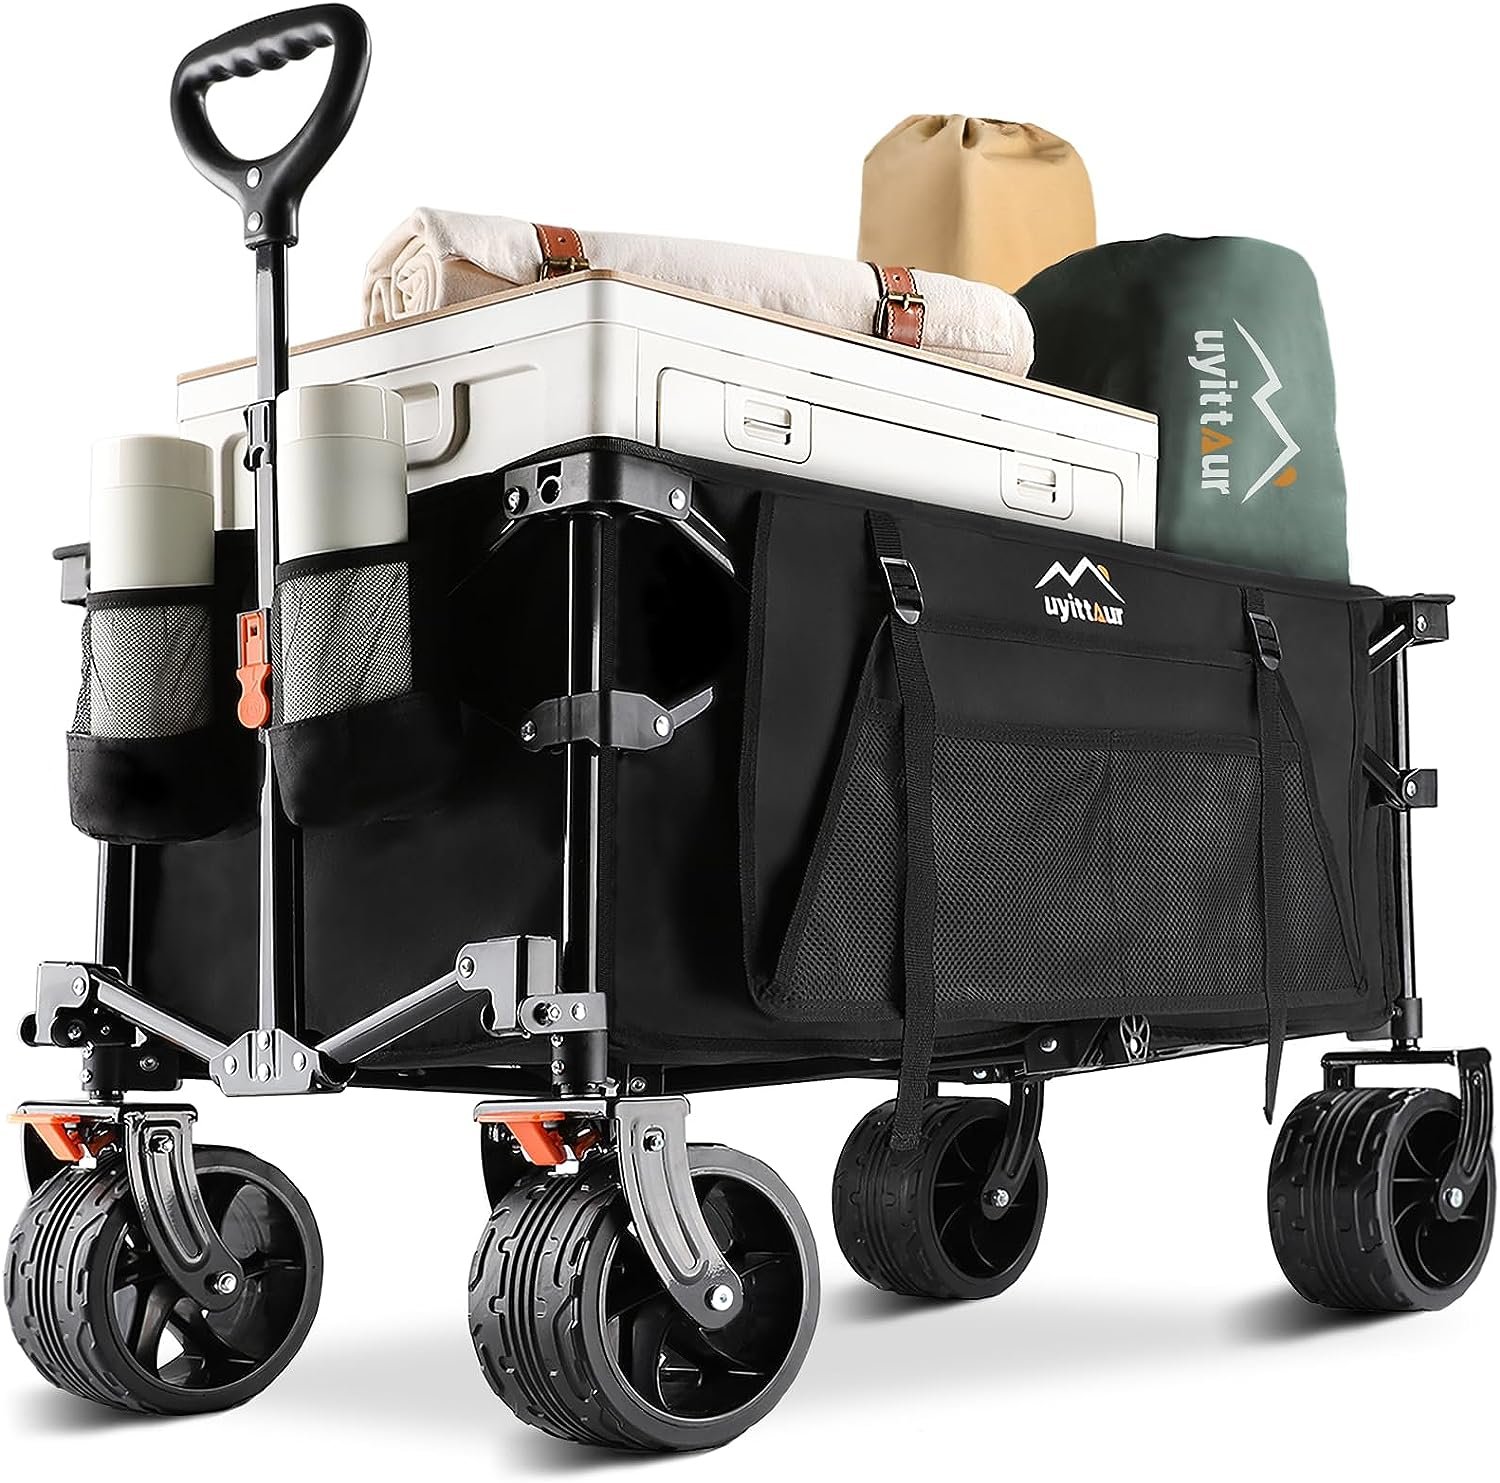 Uyittour Collapsible Folding Wagon Cart Review